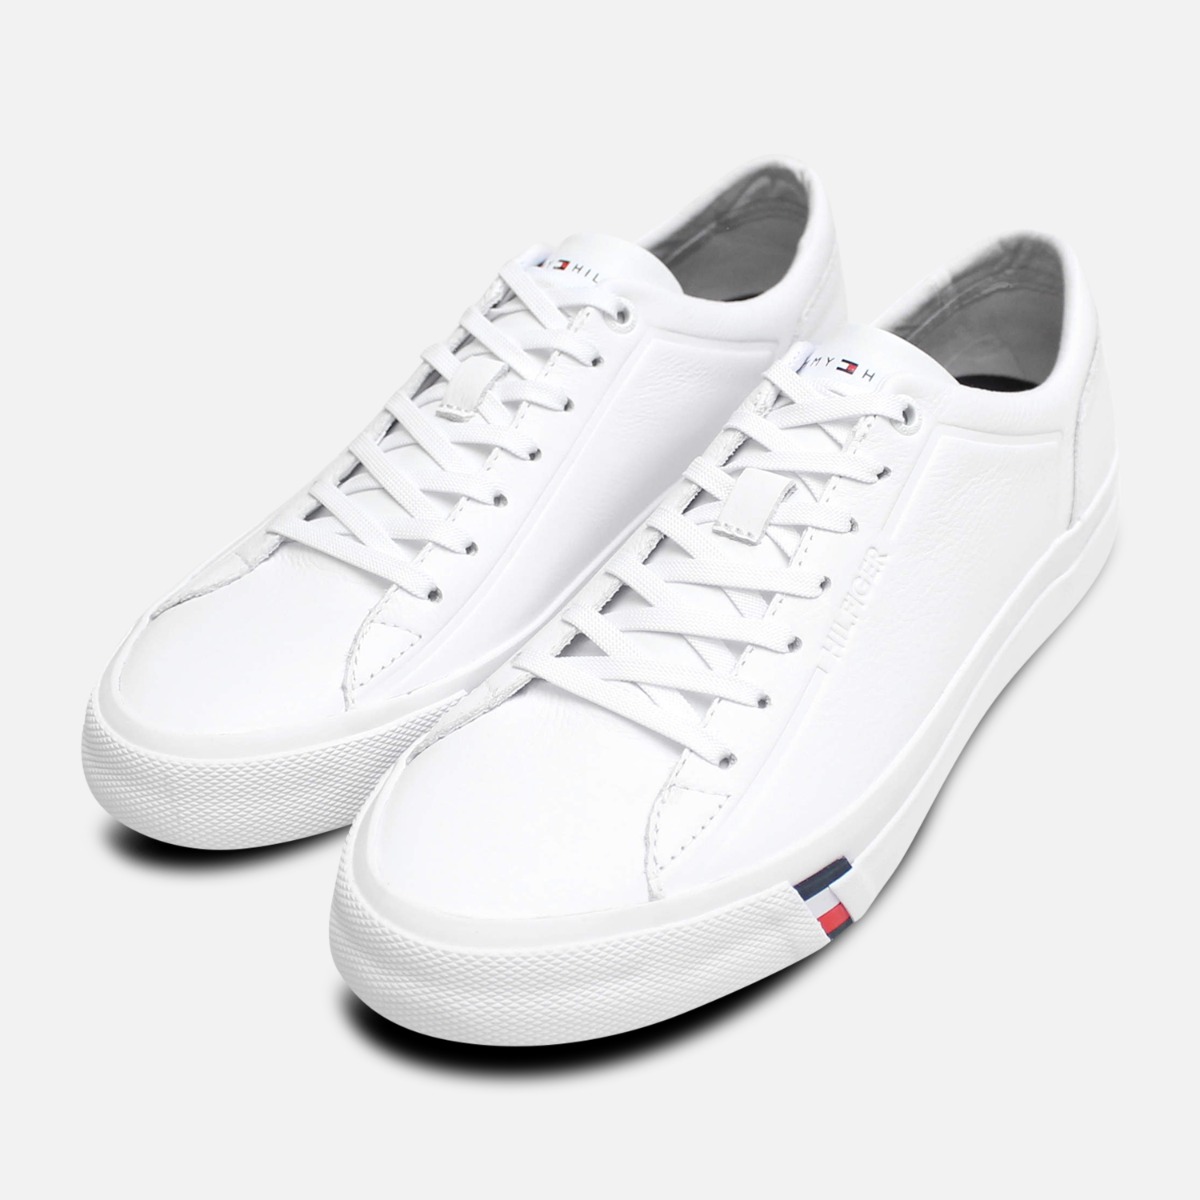 leather tommy hilfiger shoes